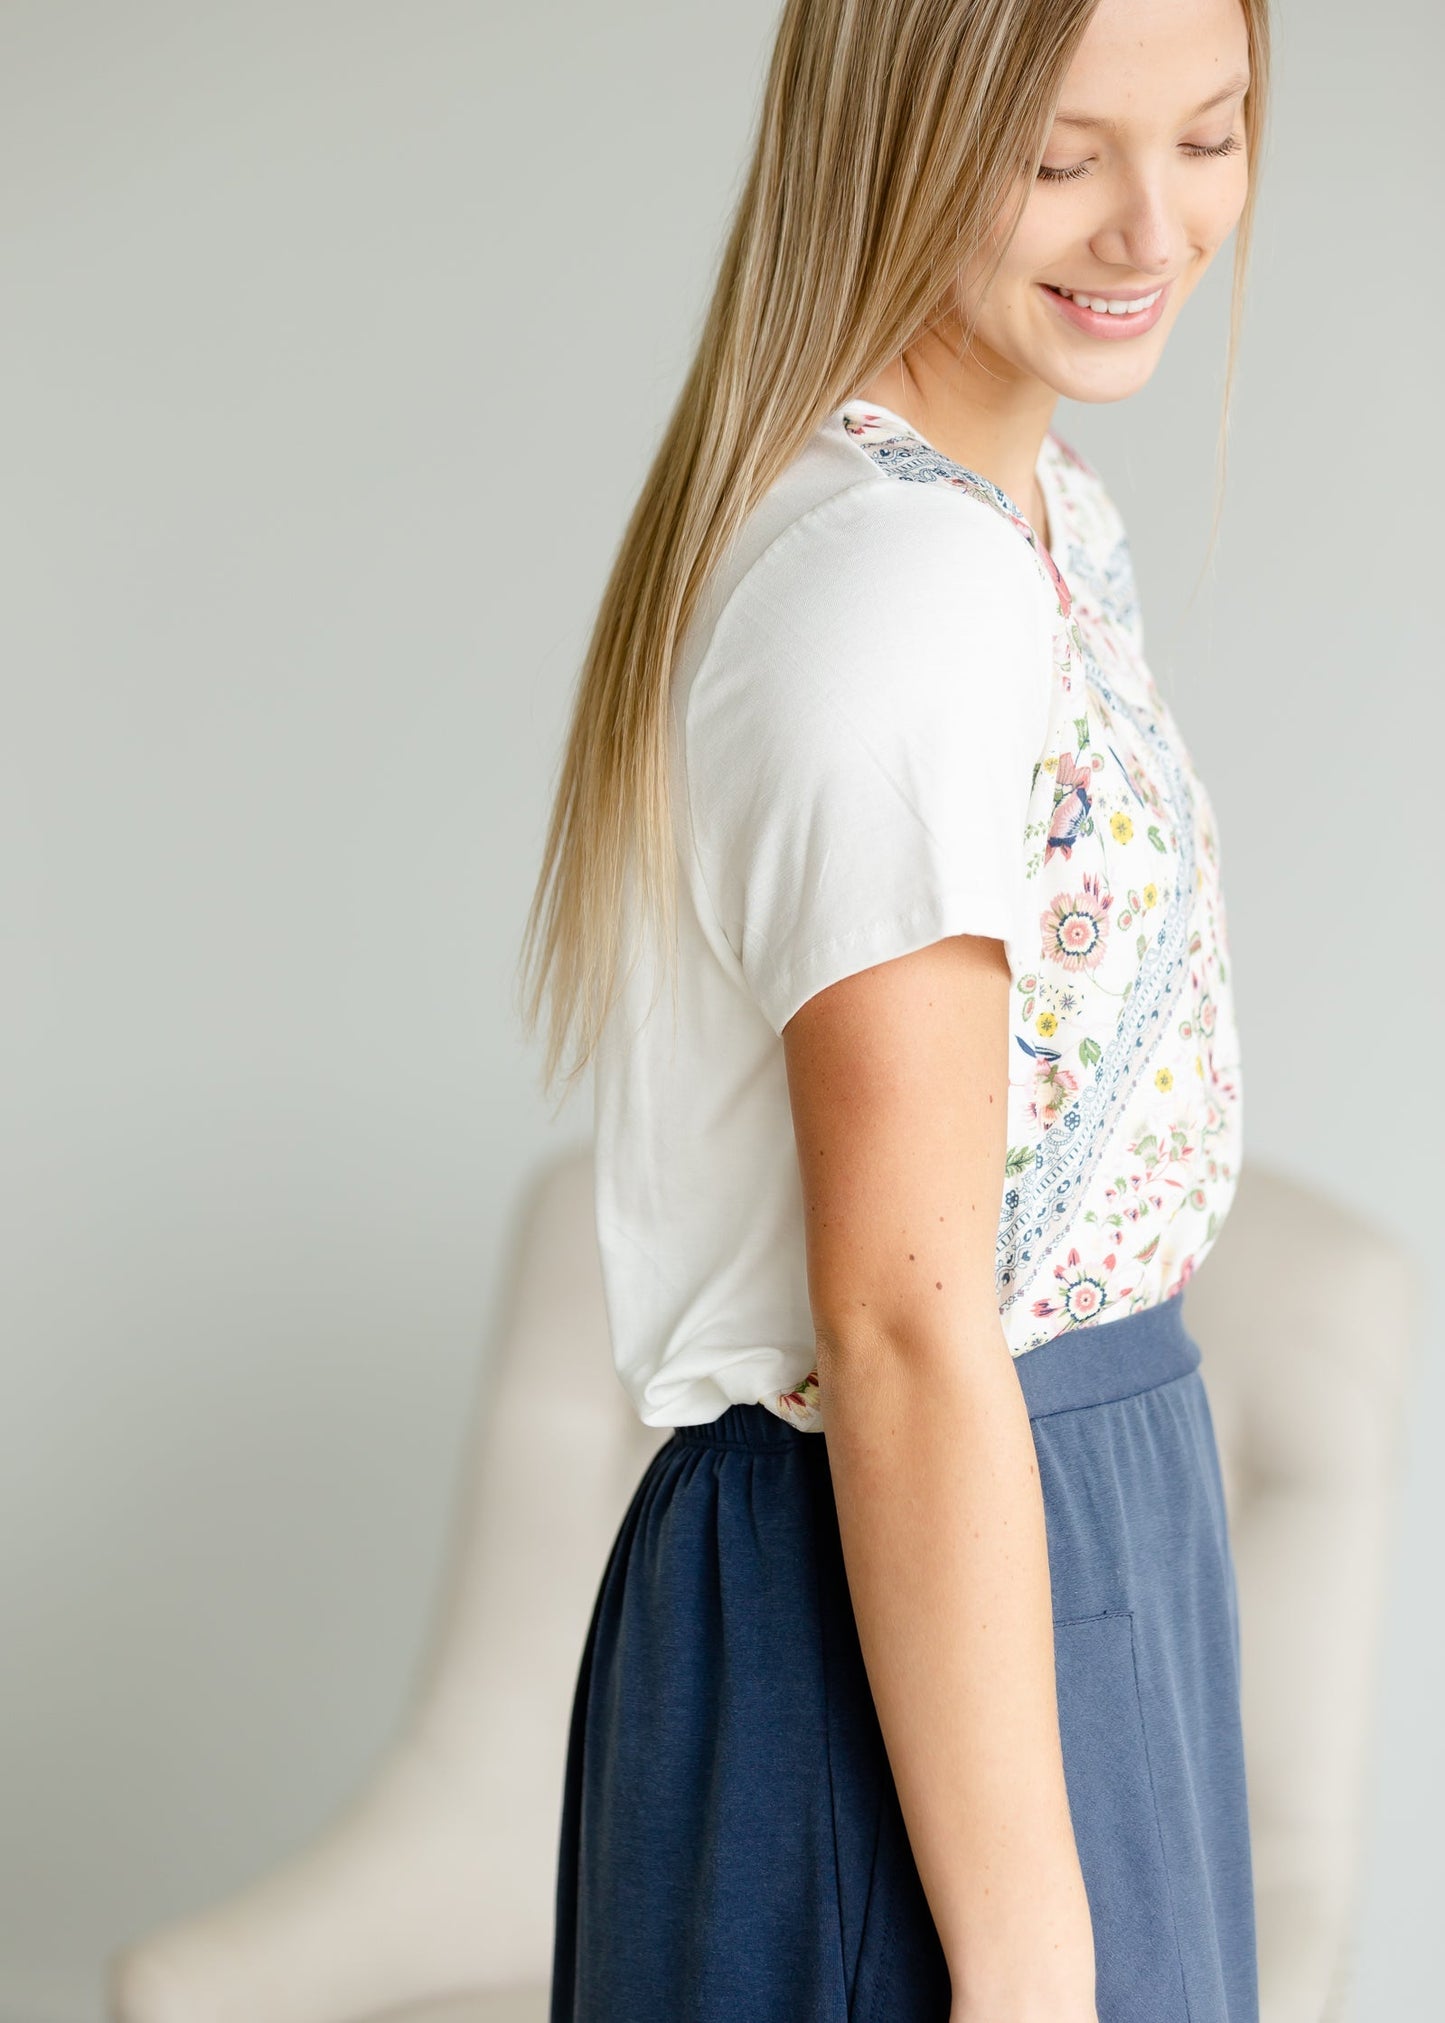 Ivory Abstract Floral Top - FINAL SALE Tops